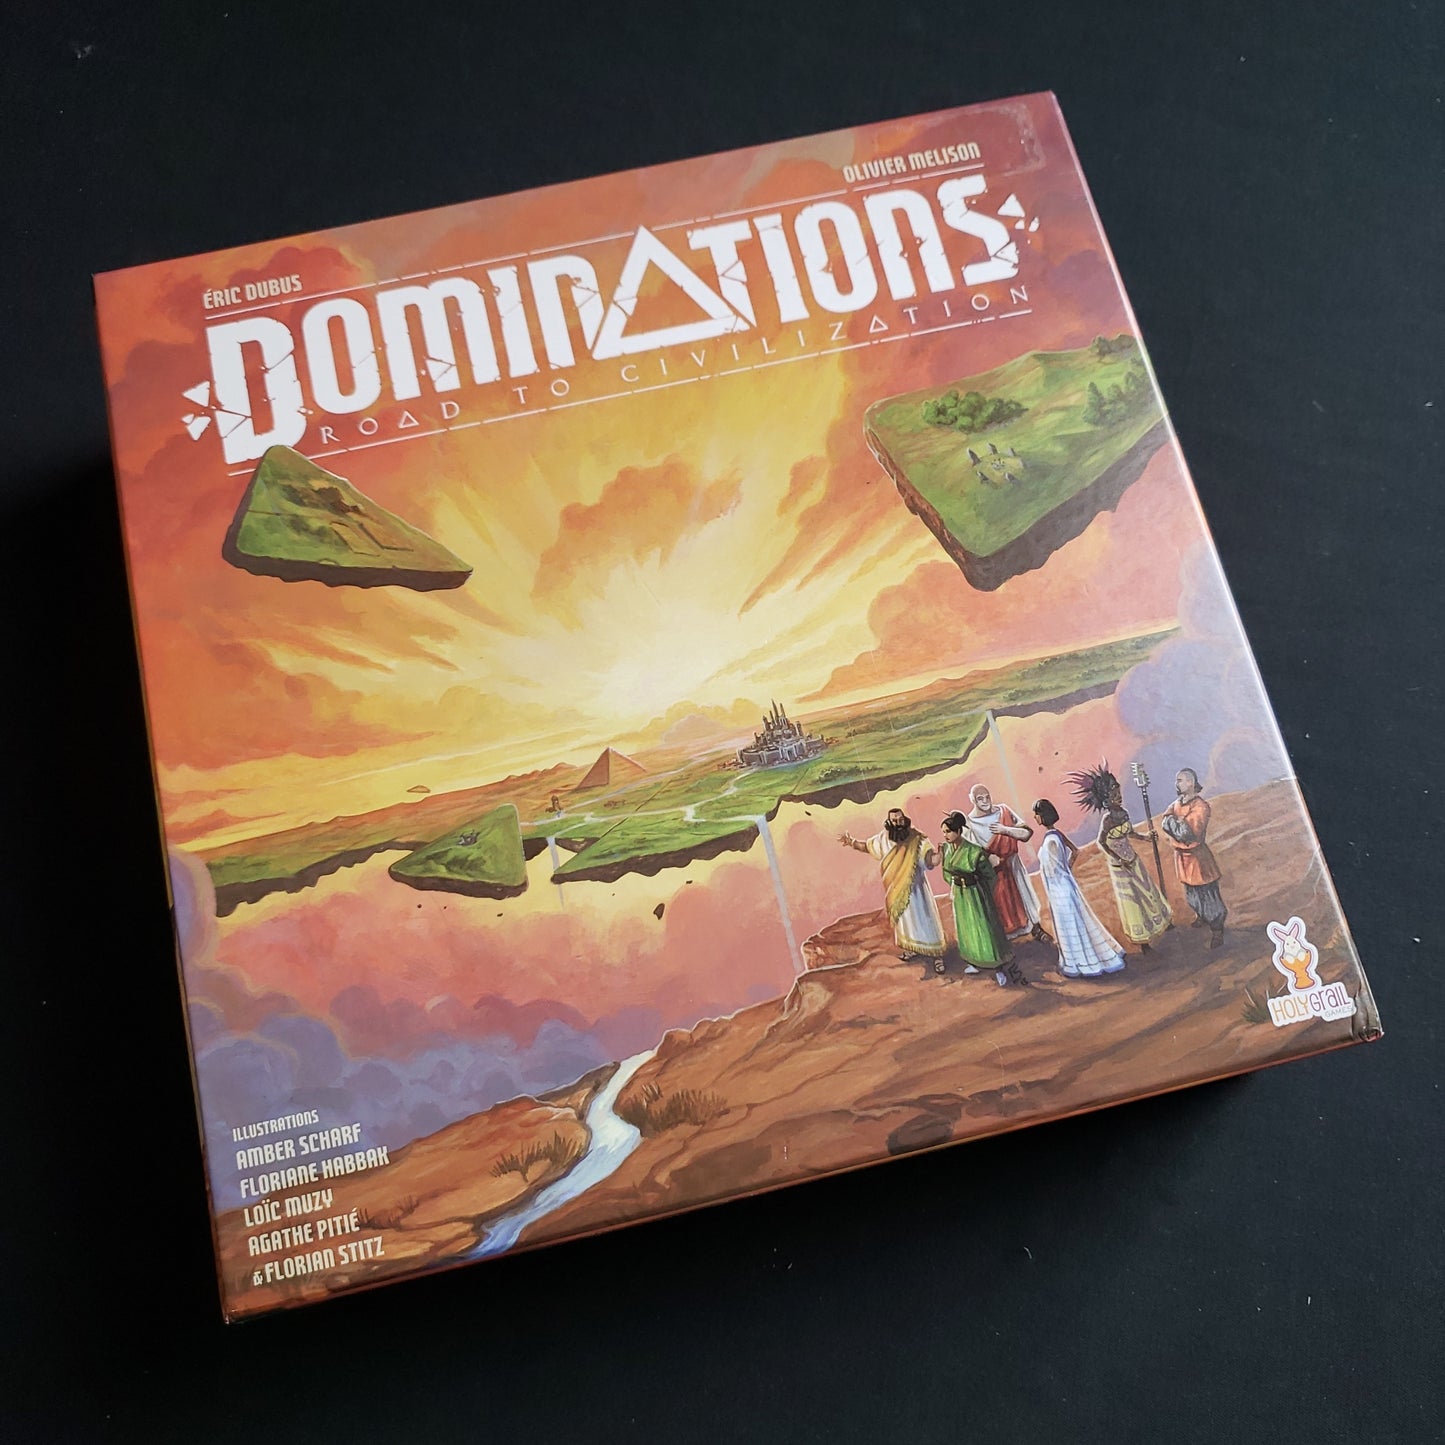 Image shows the front cover of the box of the Dominations: Road to Civilization board game